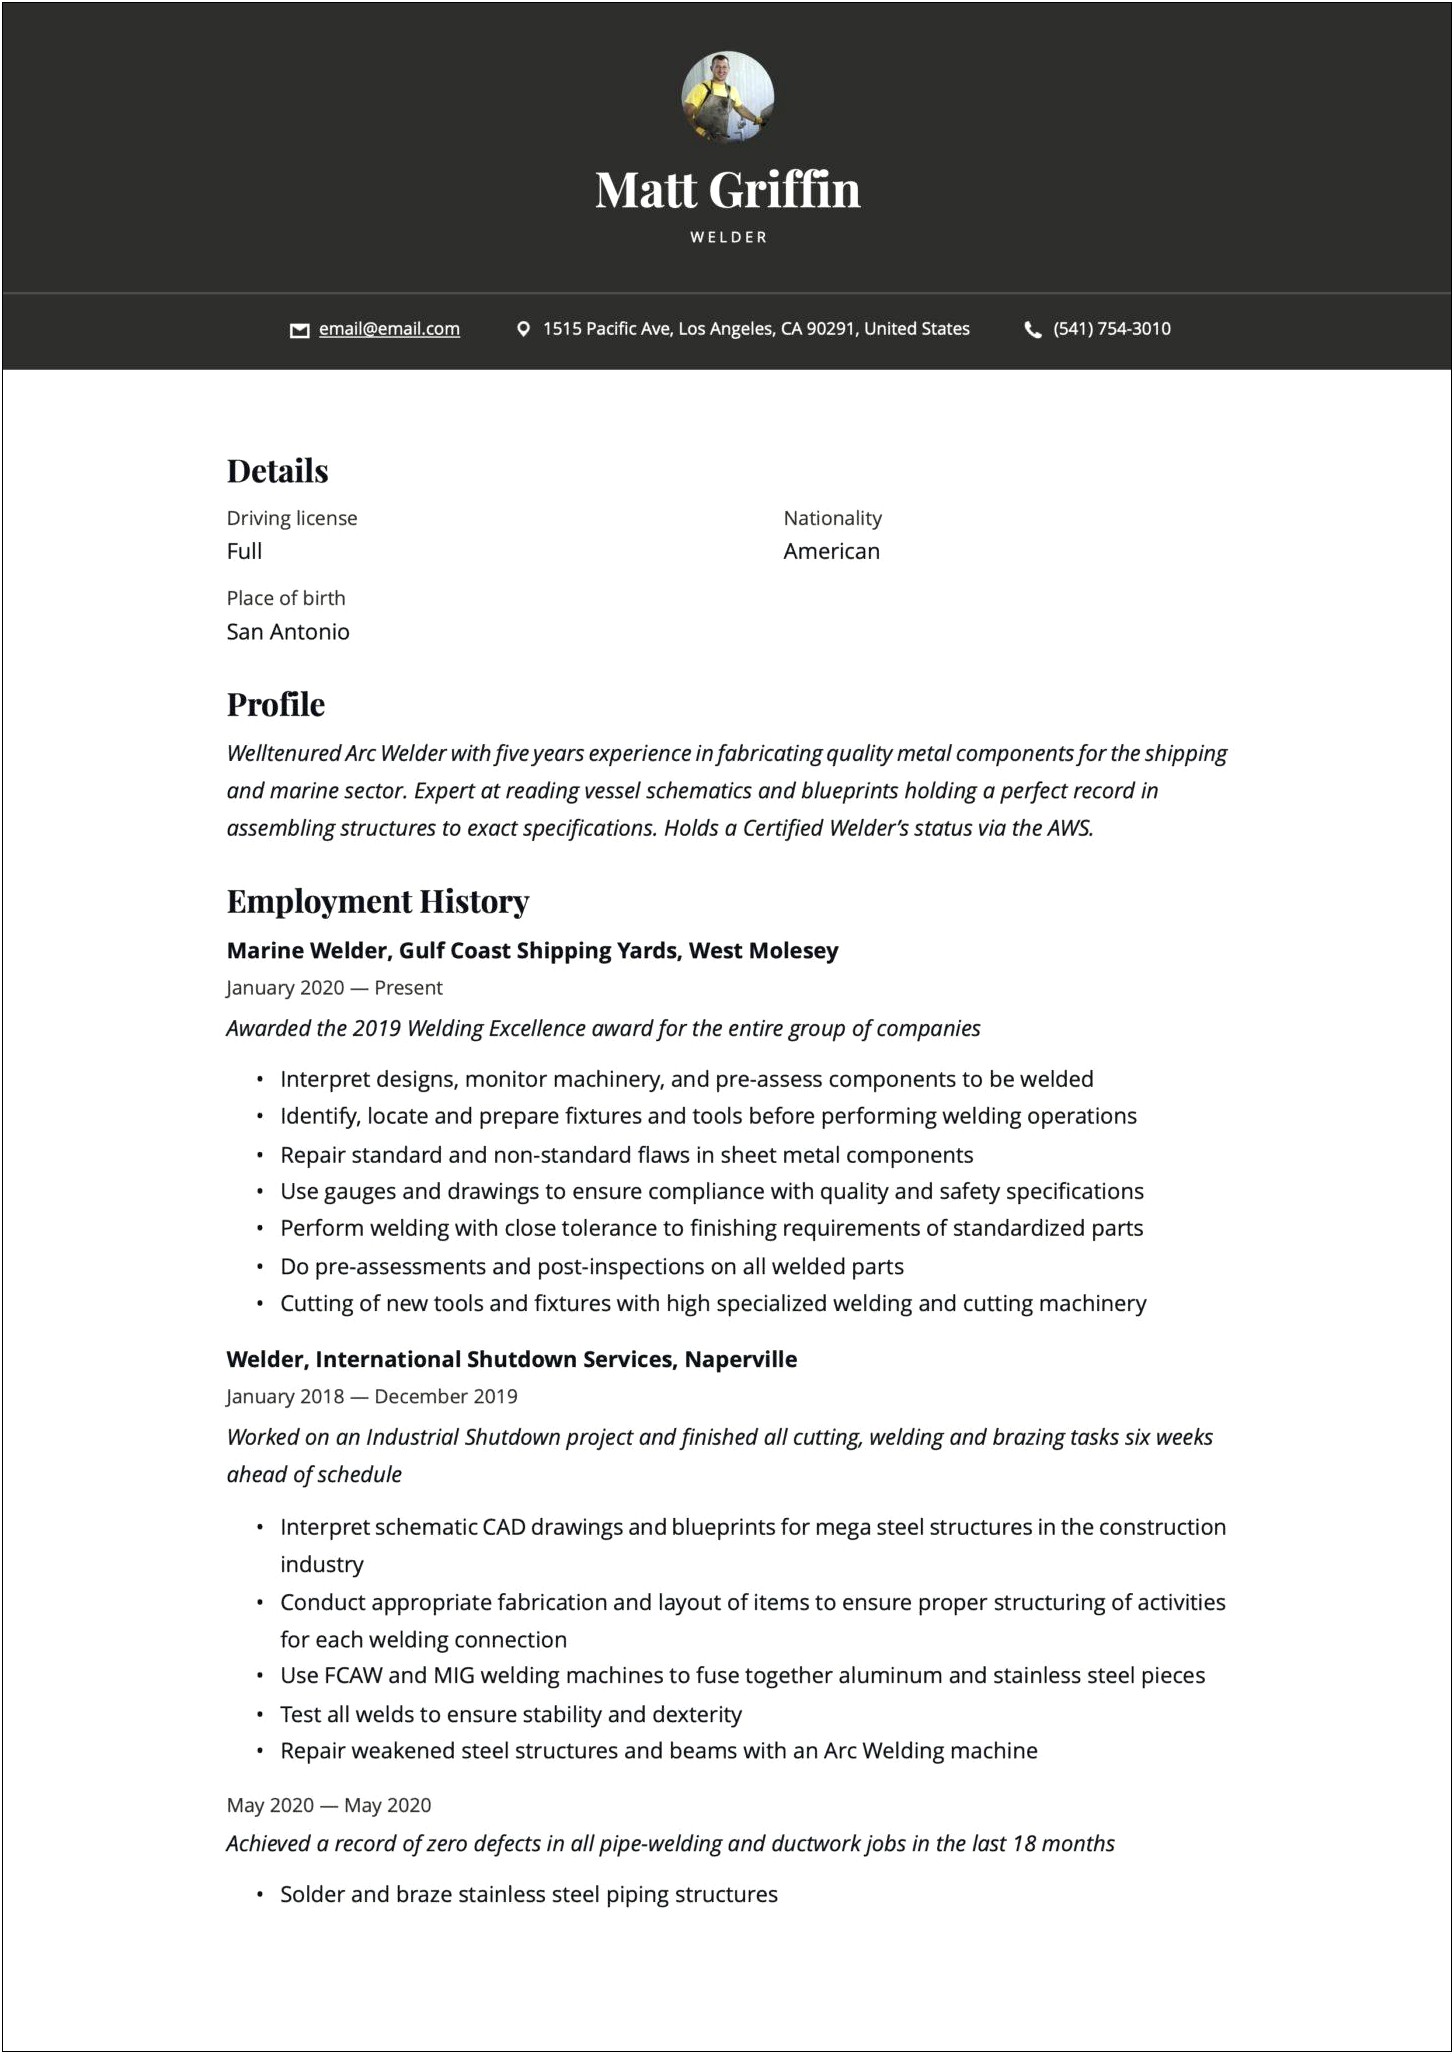 Example Of A Summary For A Welder Resume